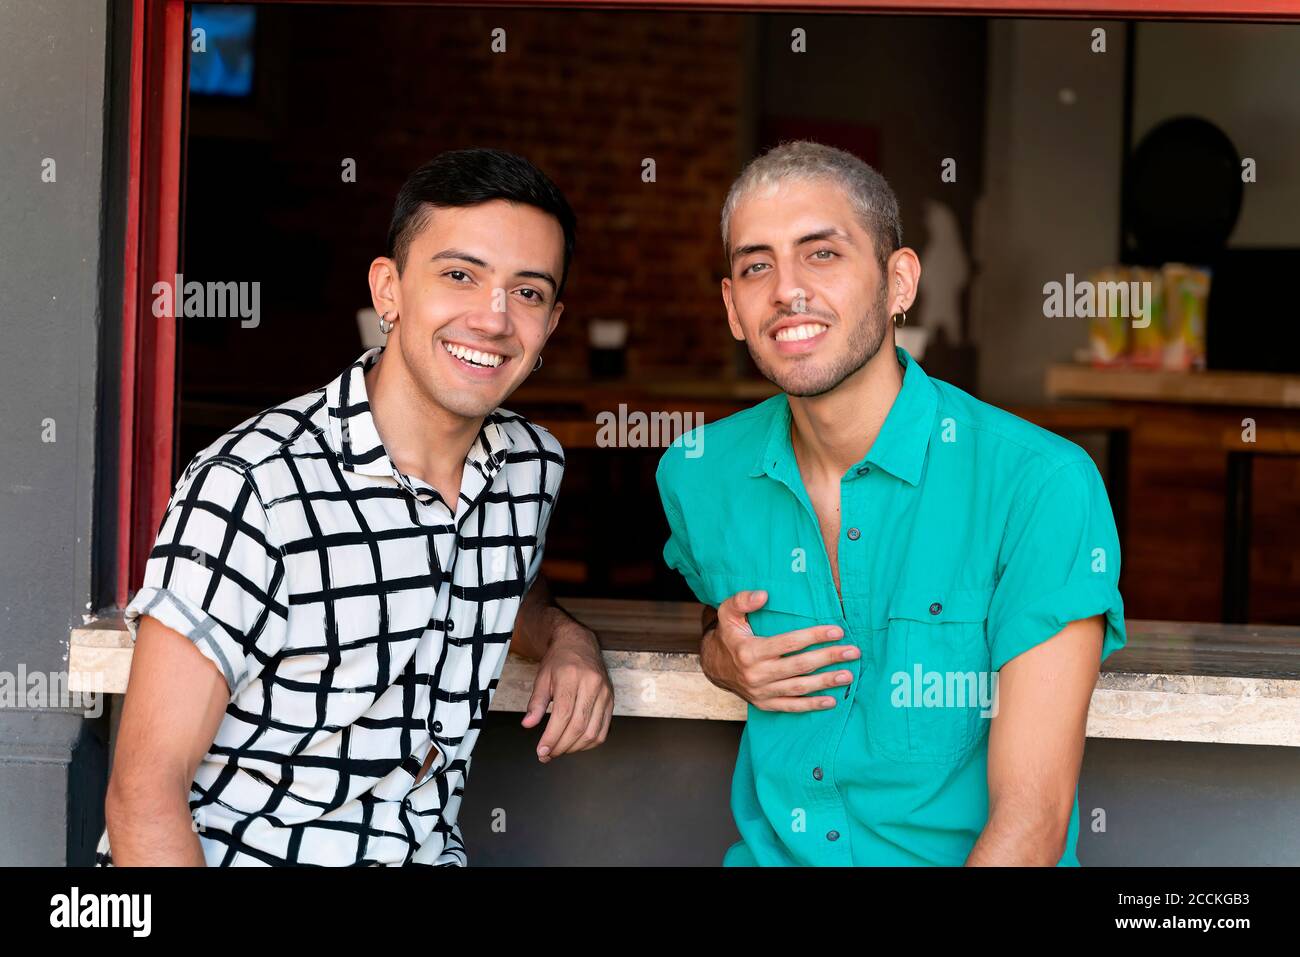 Friends smiling while sitting at bar counter of restaurant Stock Photo